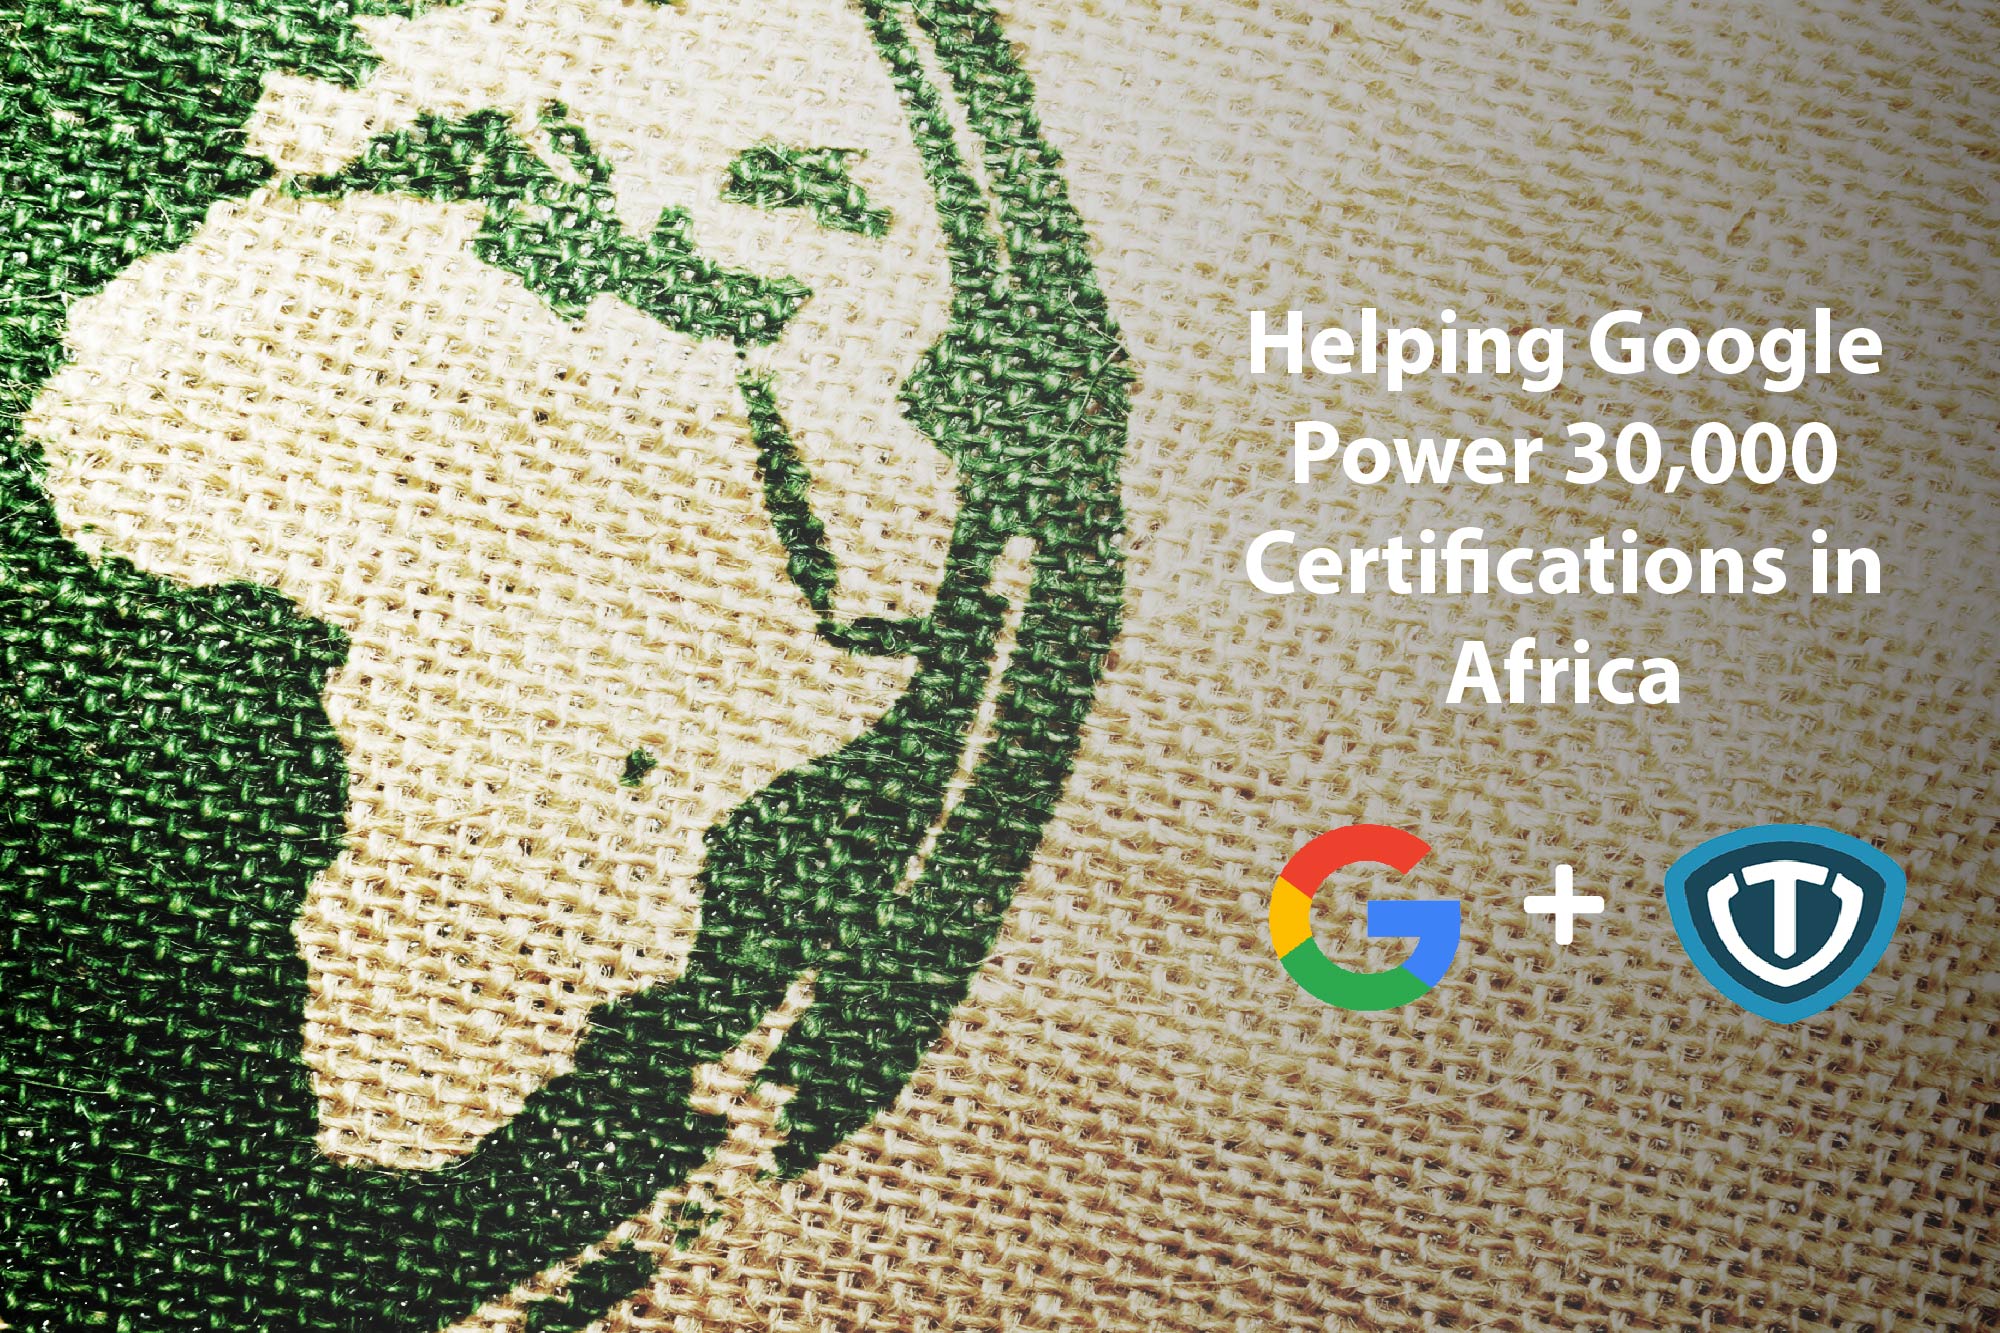 Helping Google Power 30,000 Certifications in Africa